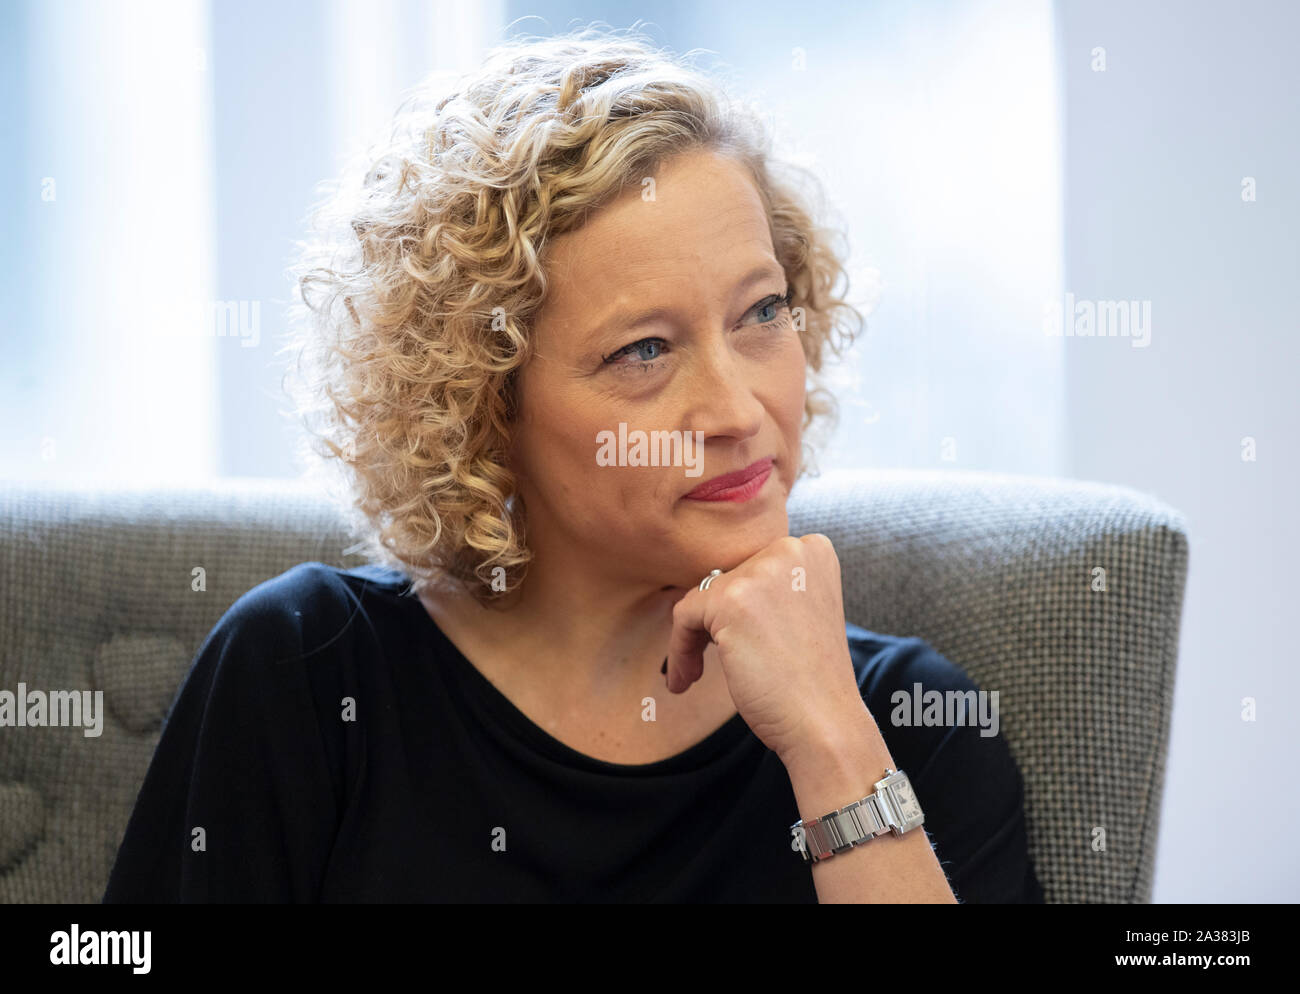 Manchester, UK. 6th October 2019. Channel 4 journalist Cathy Newman appears at Manchester Literature Festival discussing her book Bloody Brilliant Women. © Russell Hart/Alamy Live News. Stock Photo